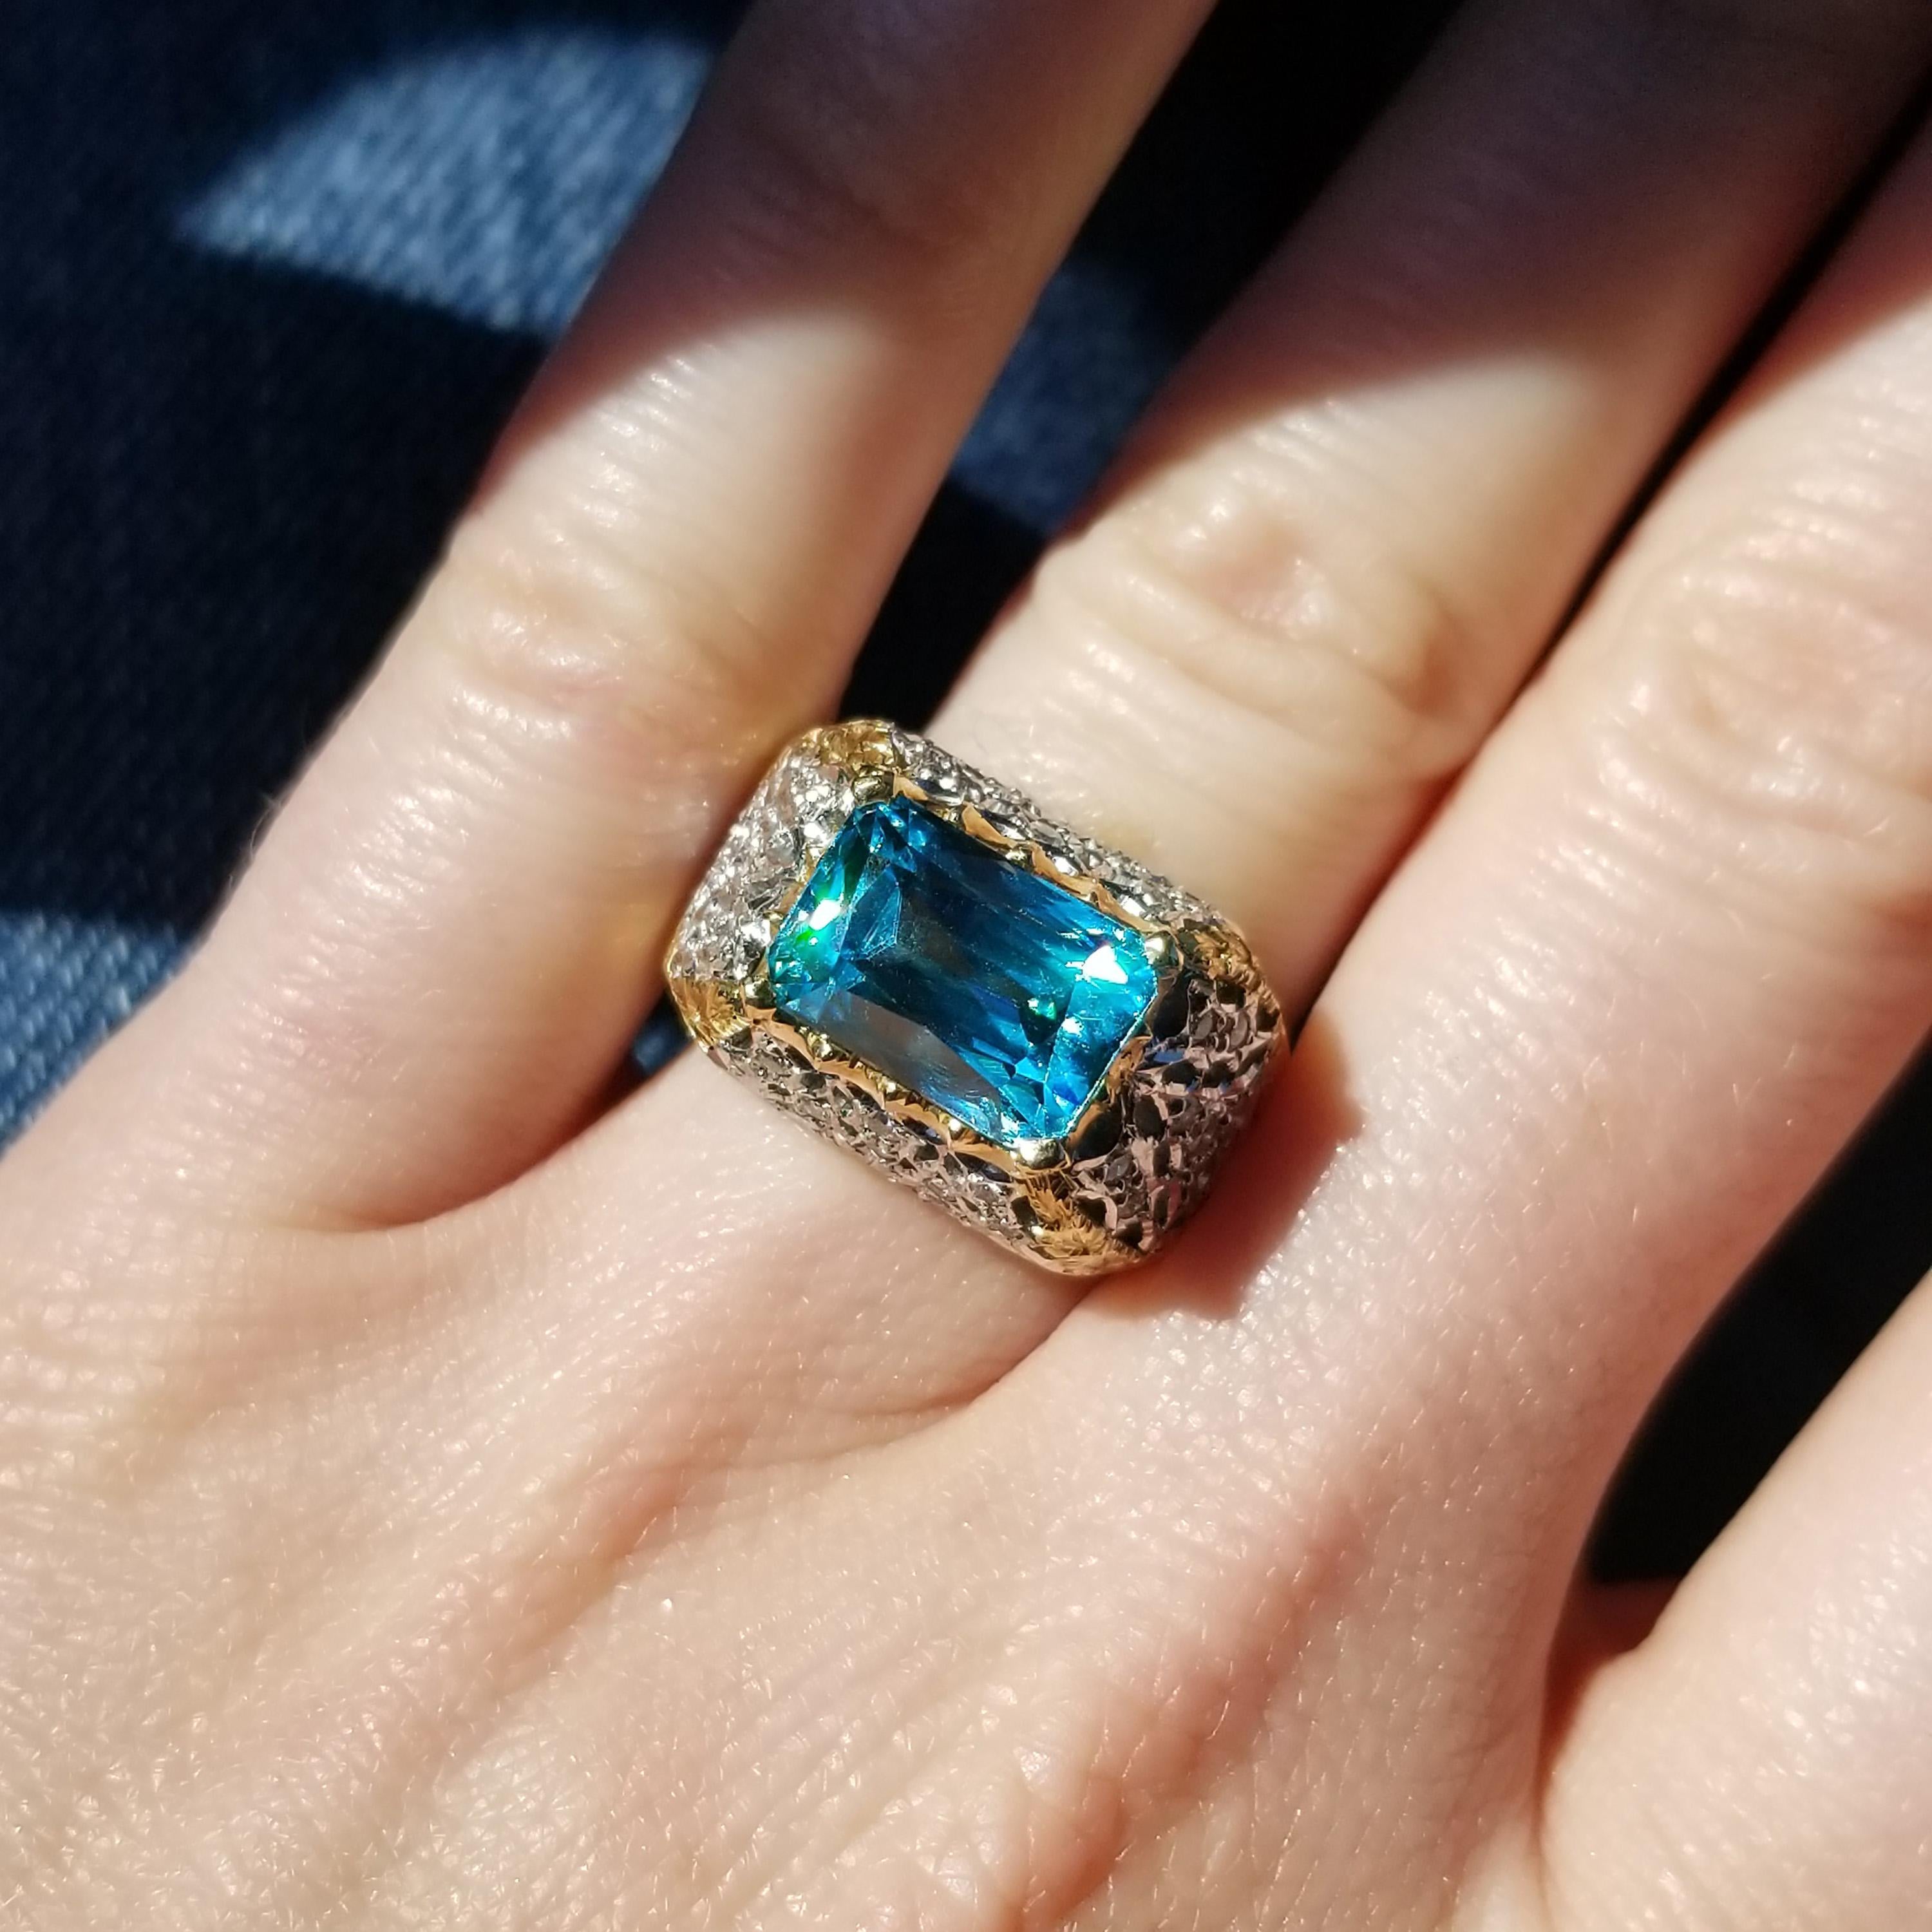 Cynthia Scott 8.69ct Cambodian Blue Zircon in 18kt Diamond Ring, Made in Italy For Sale 2